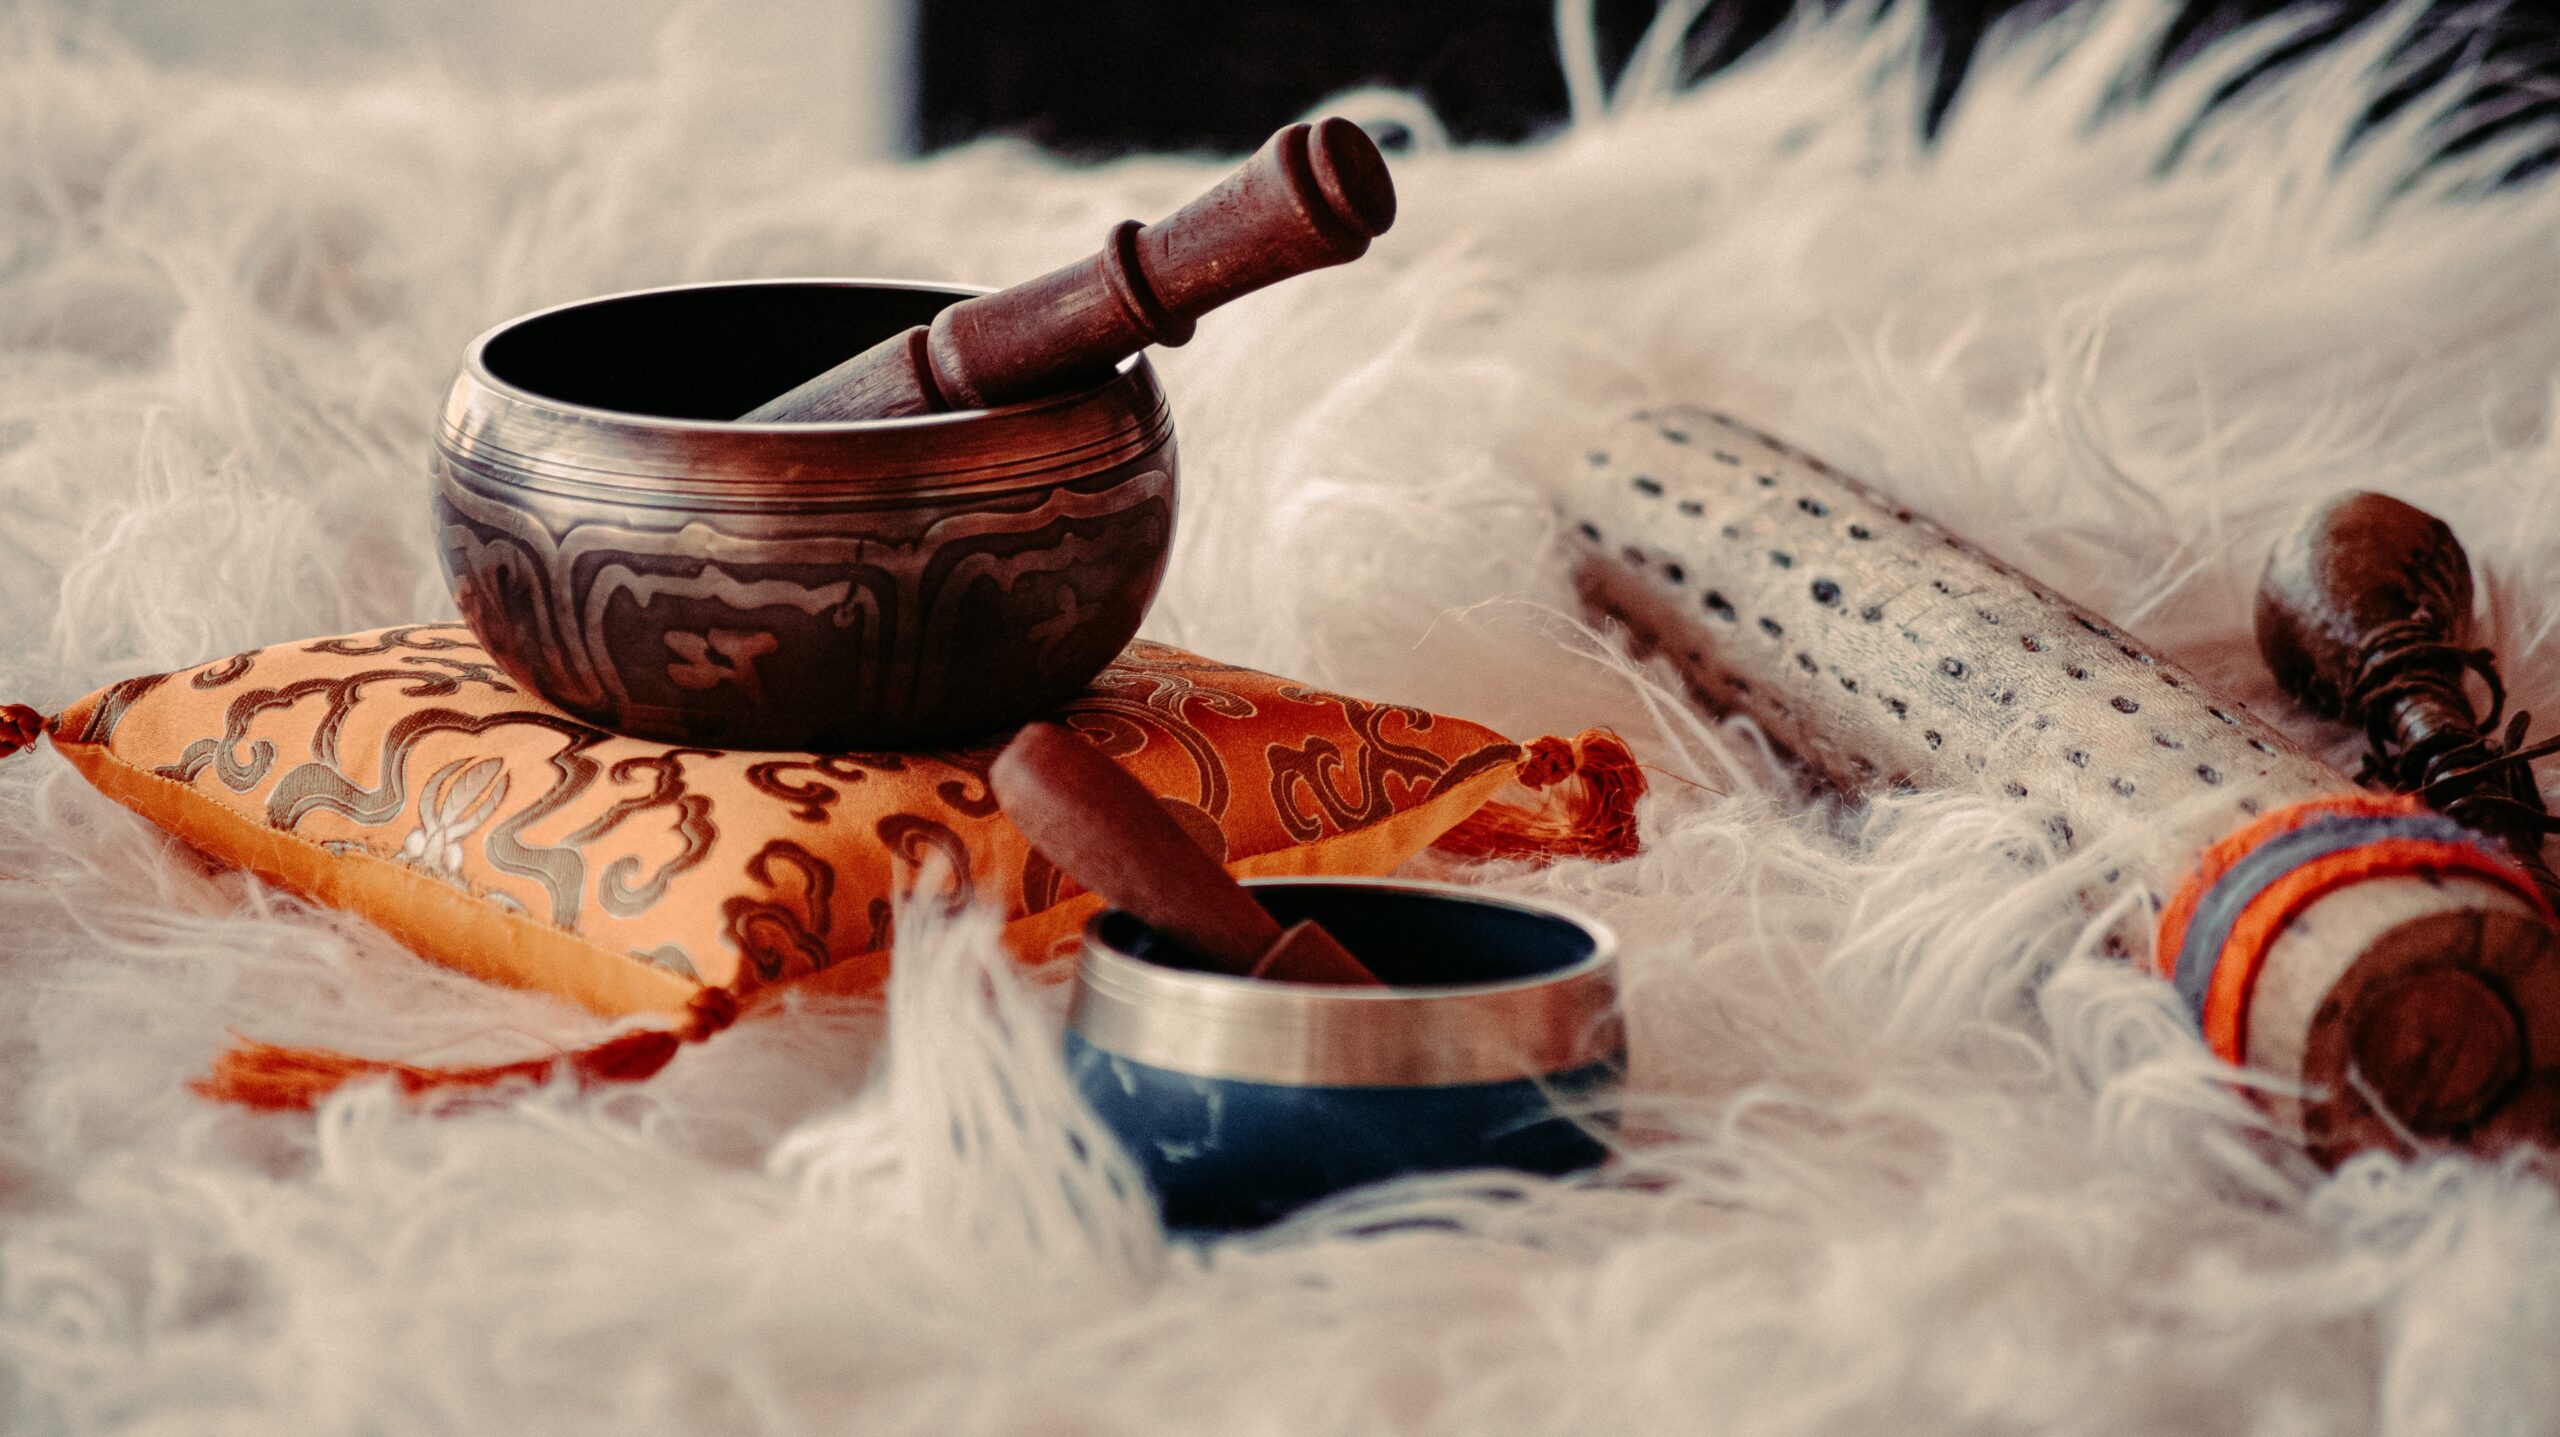 The concept of sound healing side effects warrants exploration, and presents an opportunity for deeper comprehension of these therapeutic practices.